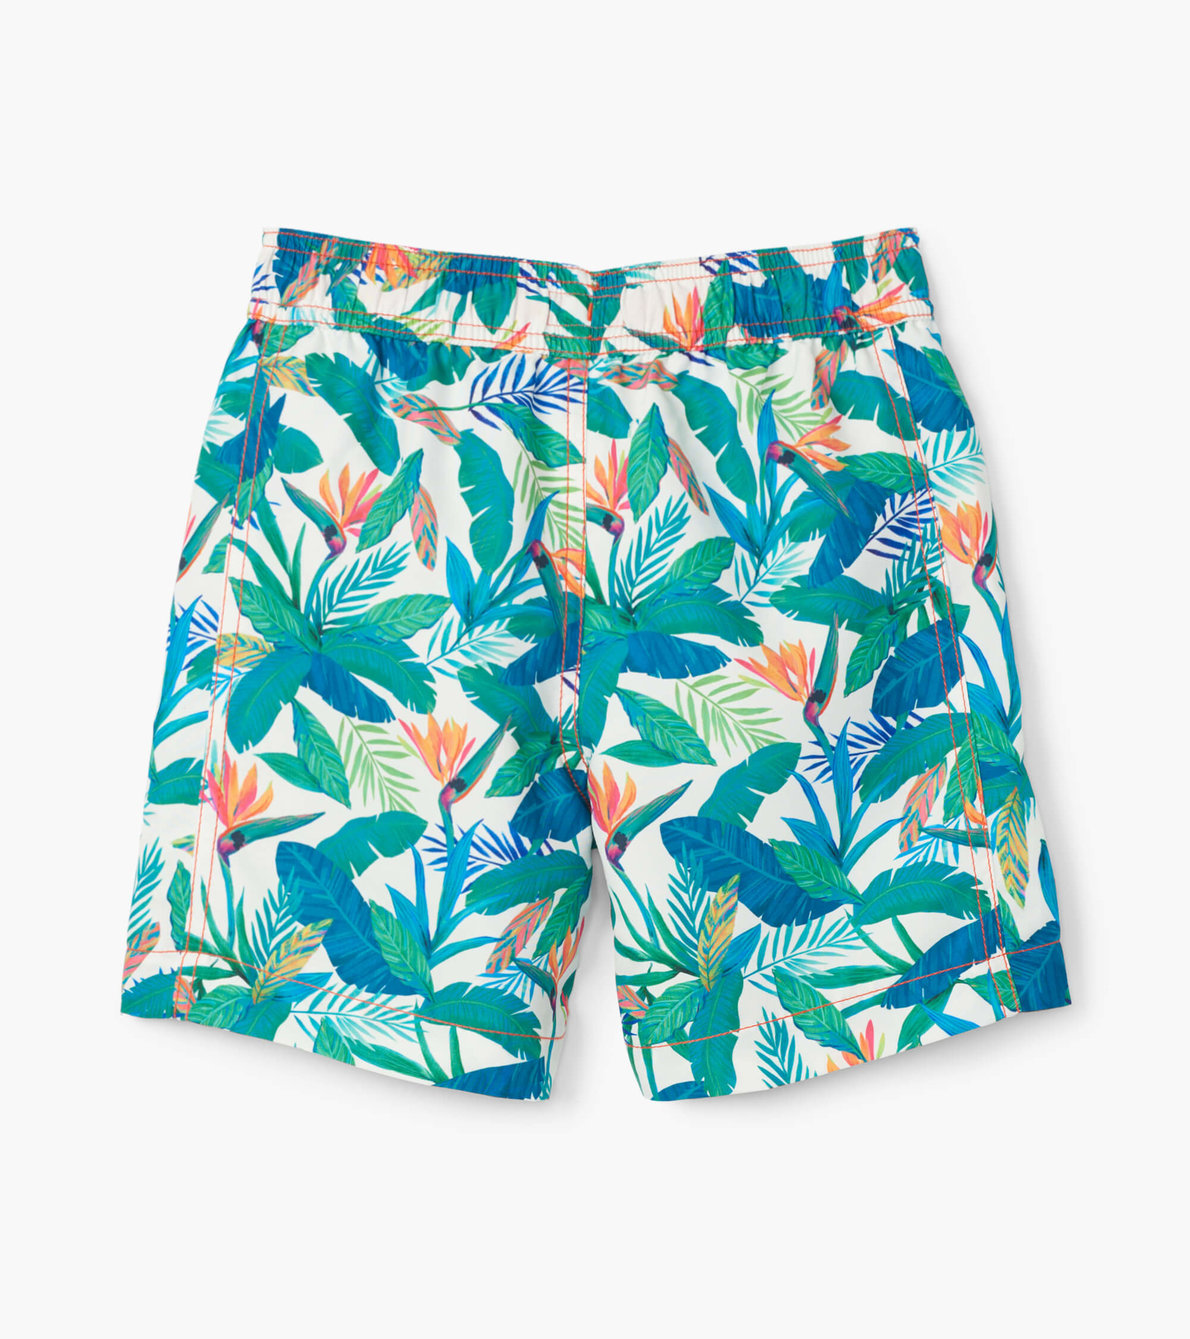 View larger image of Tropical Paradise Swim Trunks